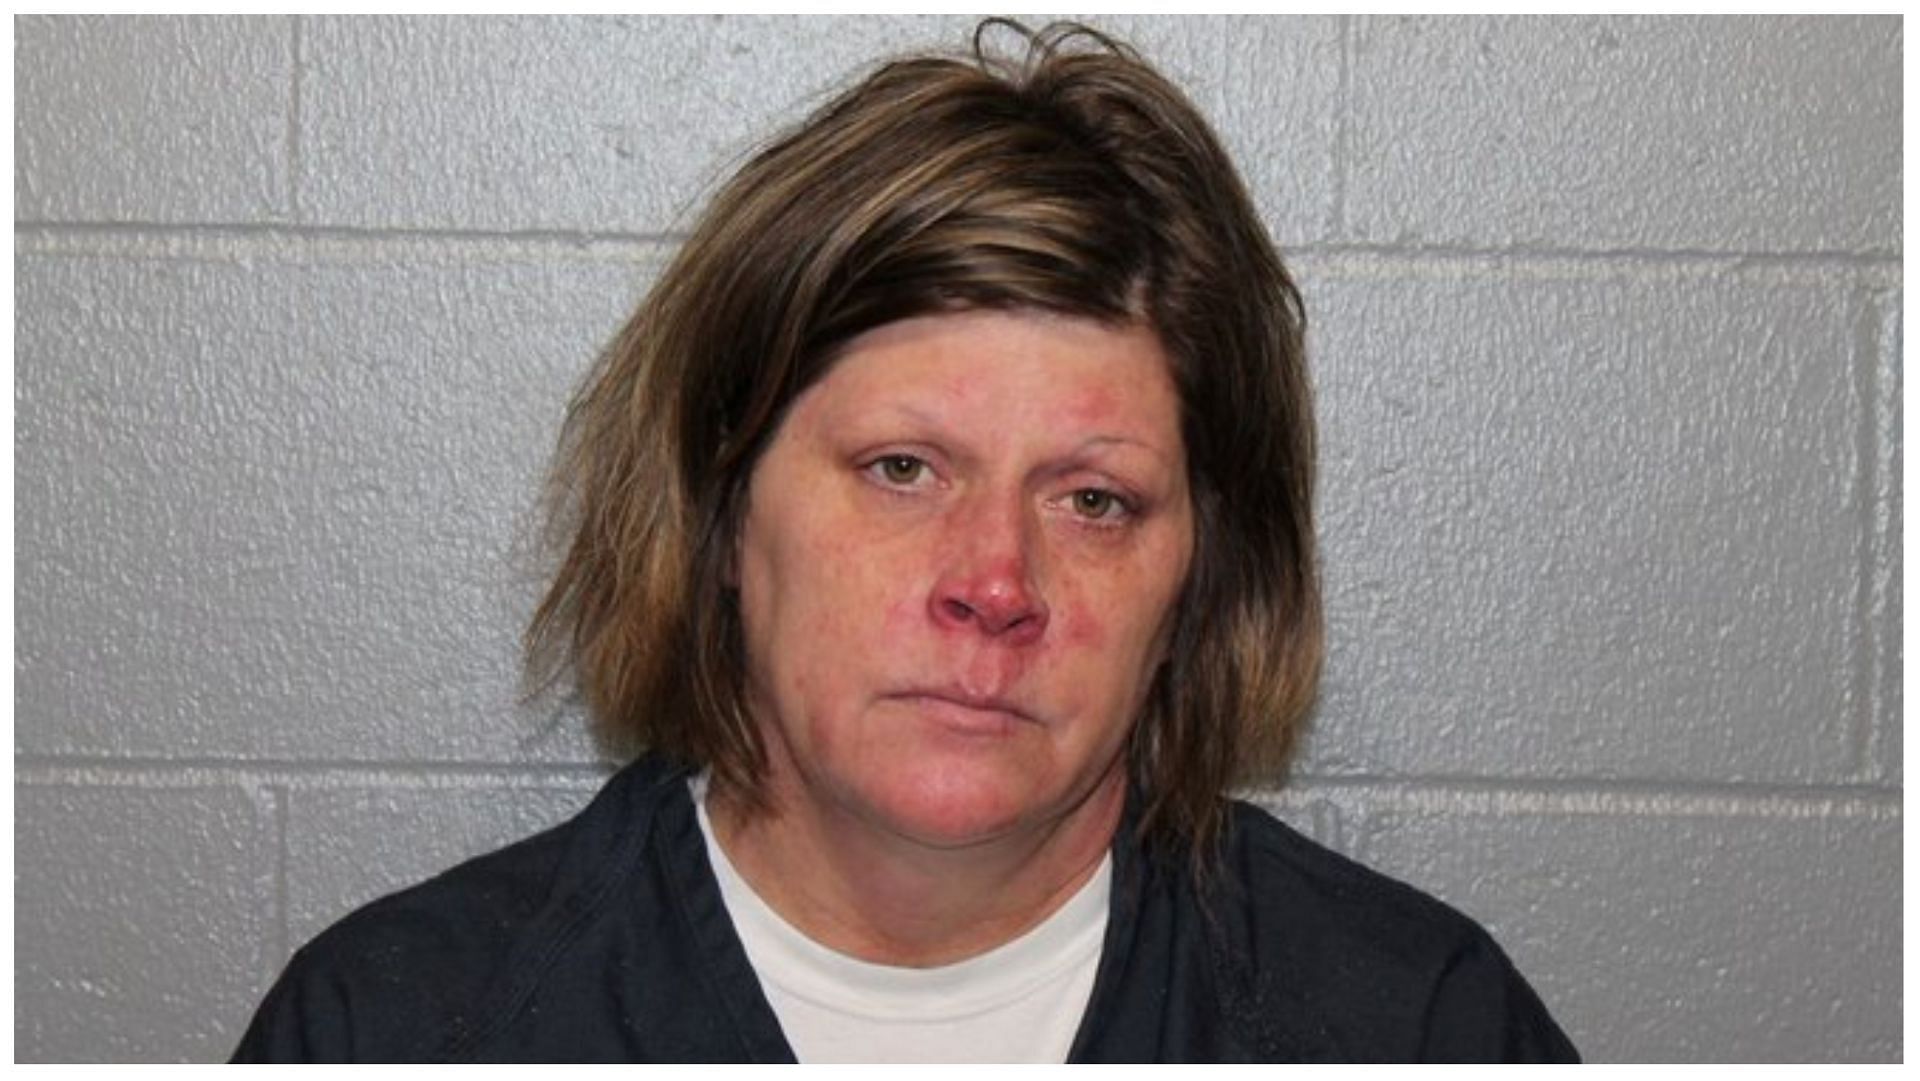 Jennifer Matter pleaded guilty to second-degree murder of her baby in 2003, (Image via Goodhue Co. Jail)